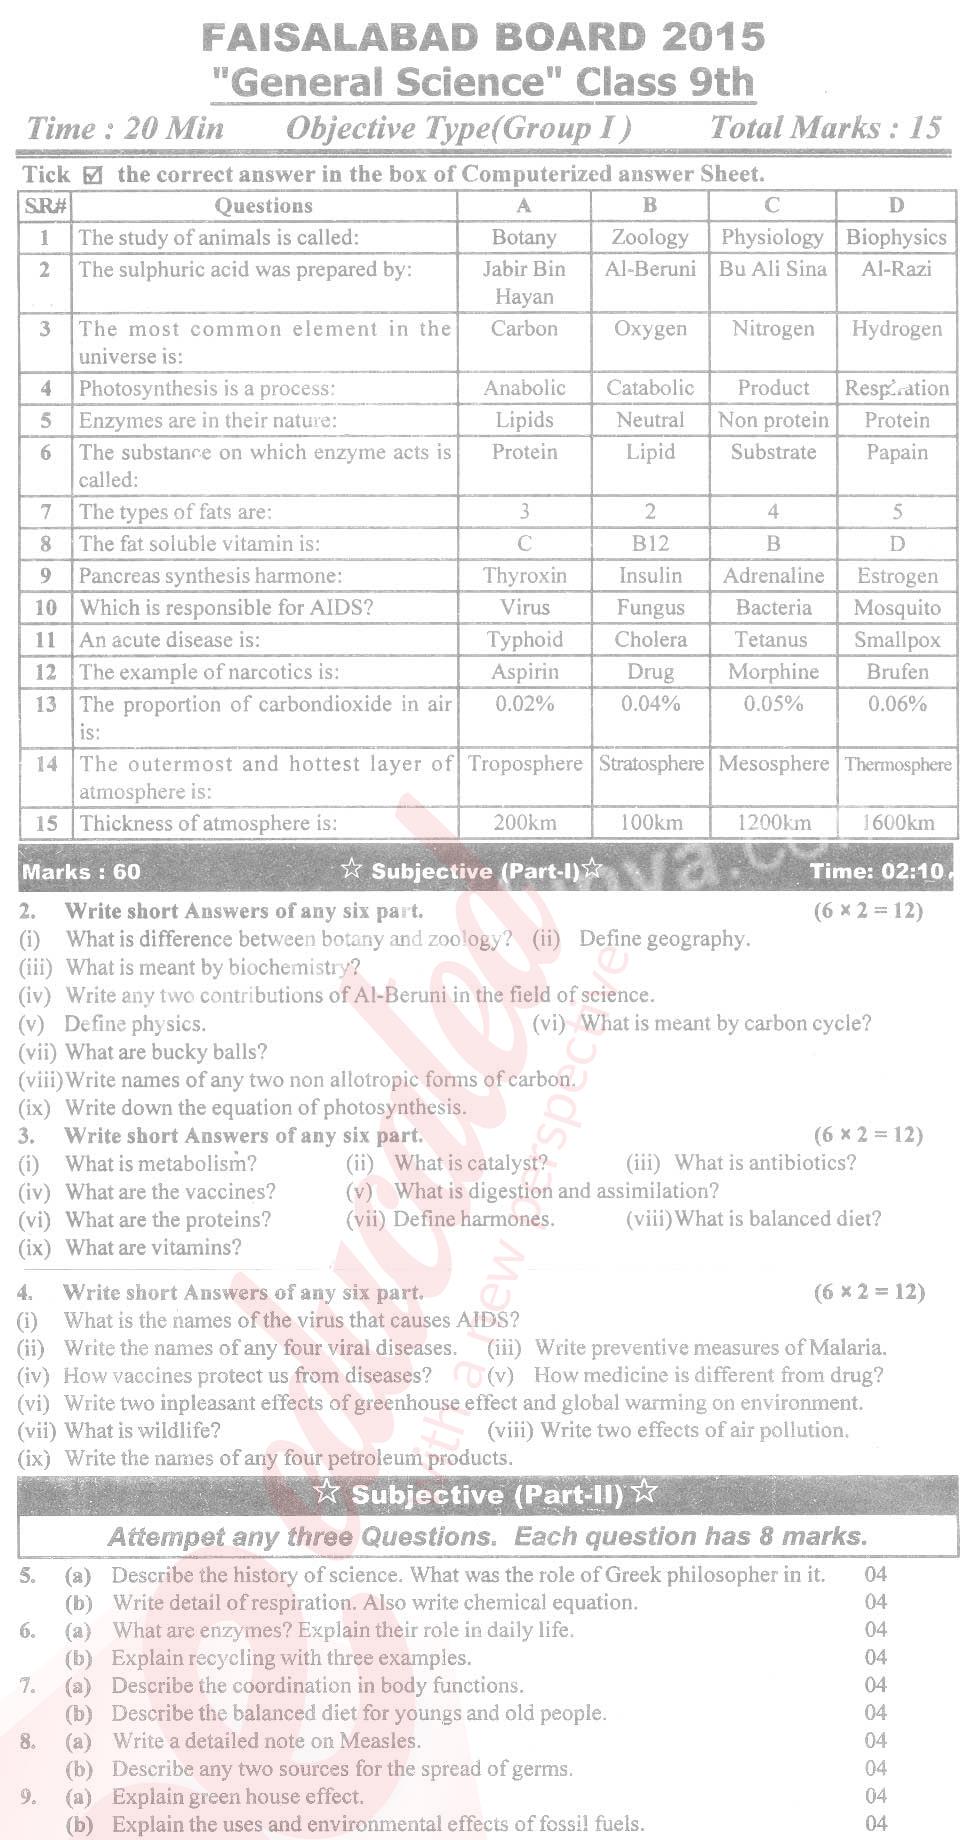 General Science 9th English Medium Past Paper Group 1 BISE Faisalabad 2015